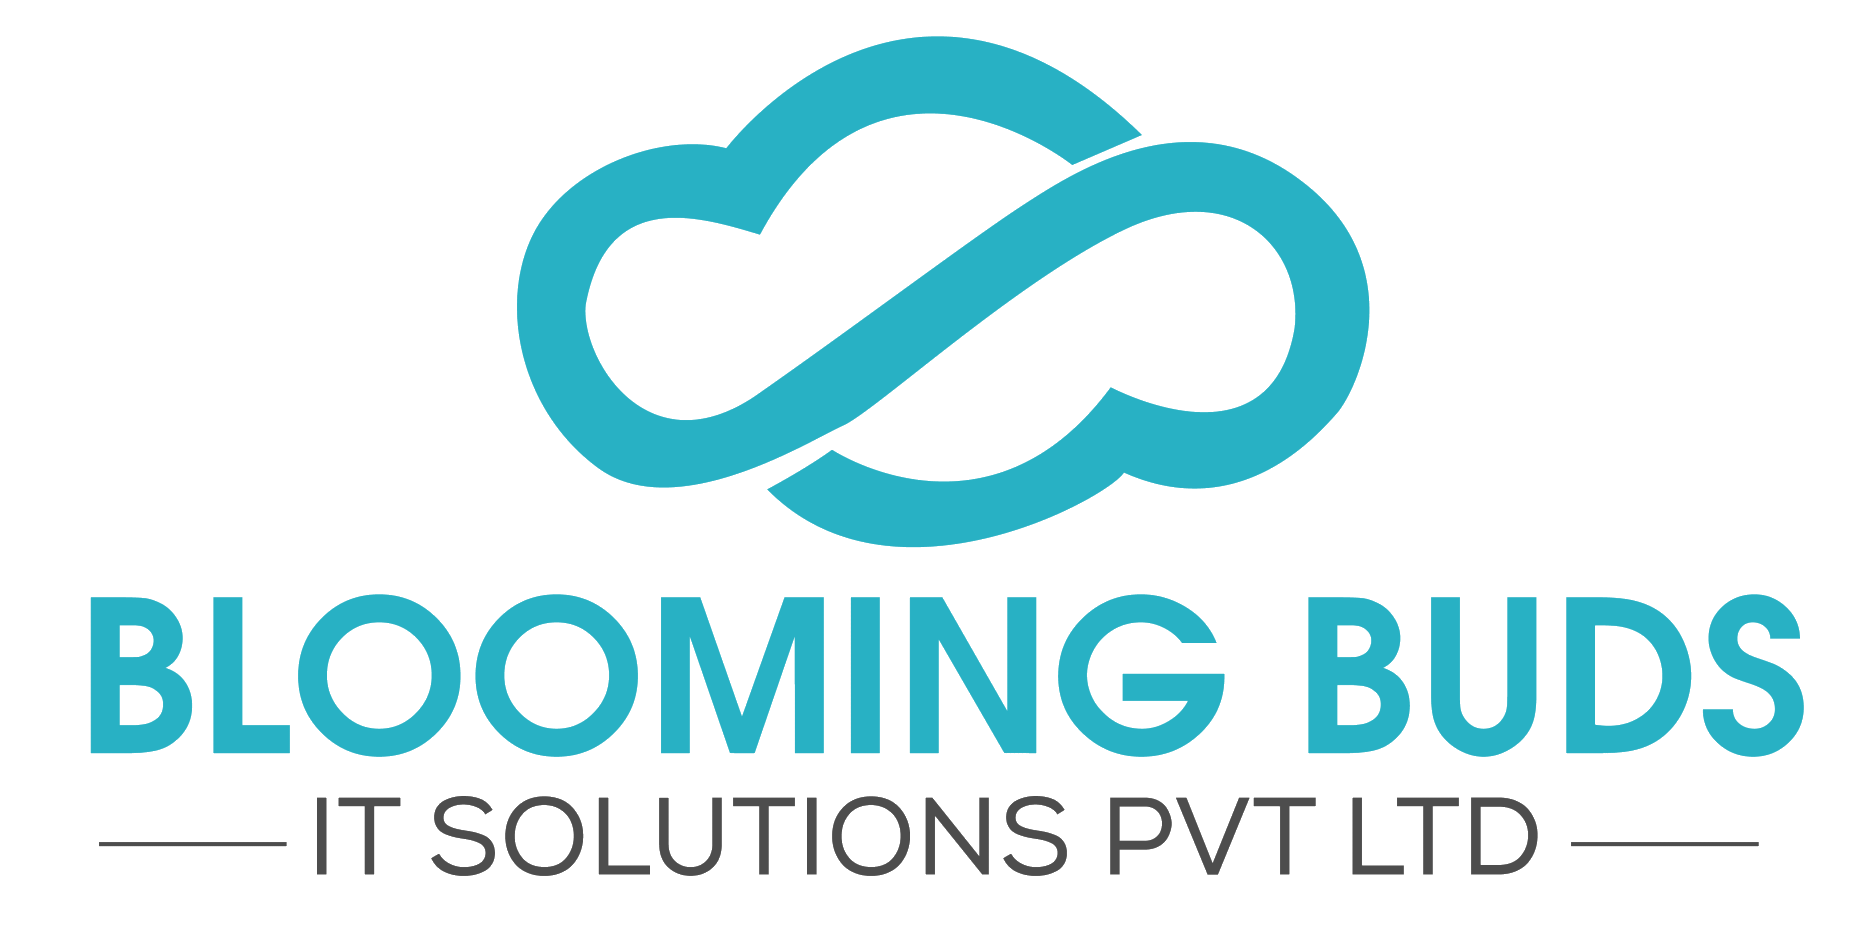 Blooming Buds It Solutions